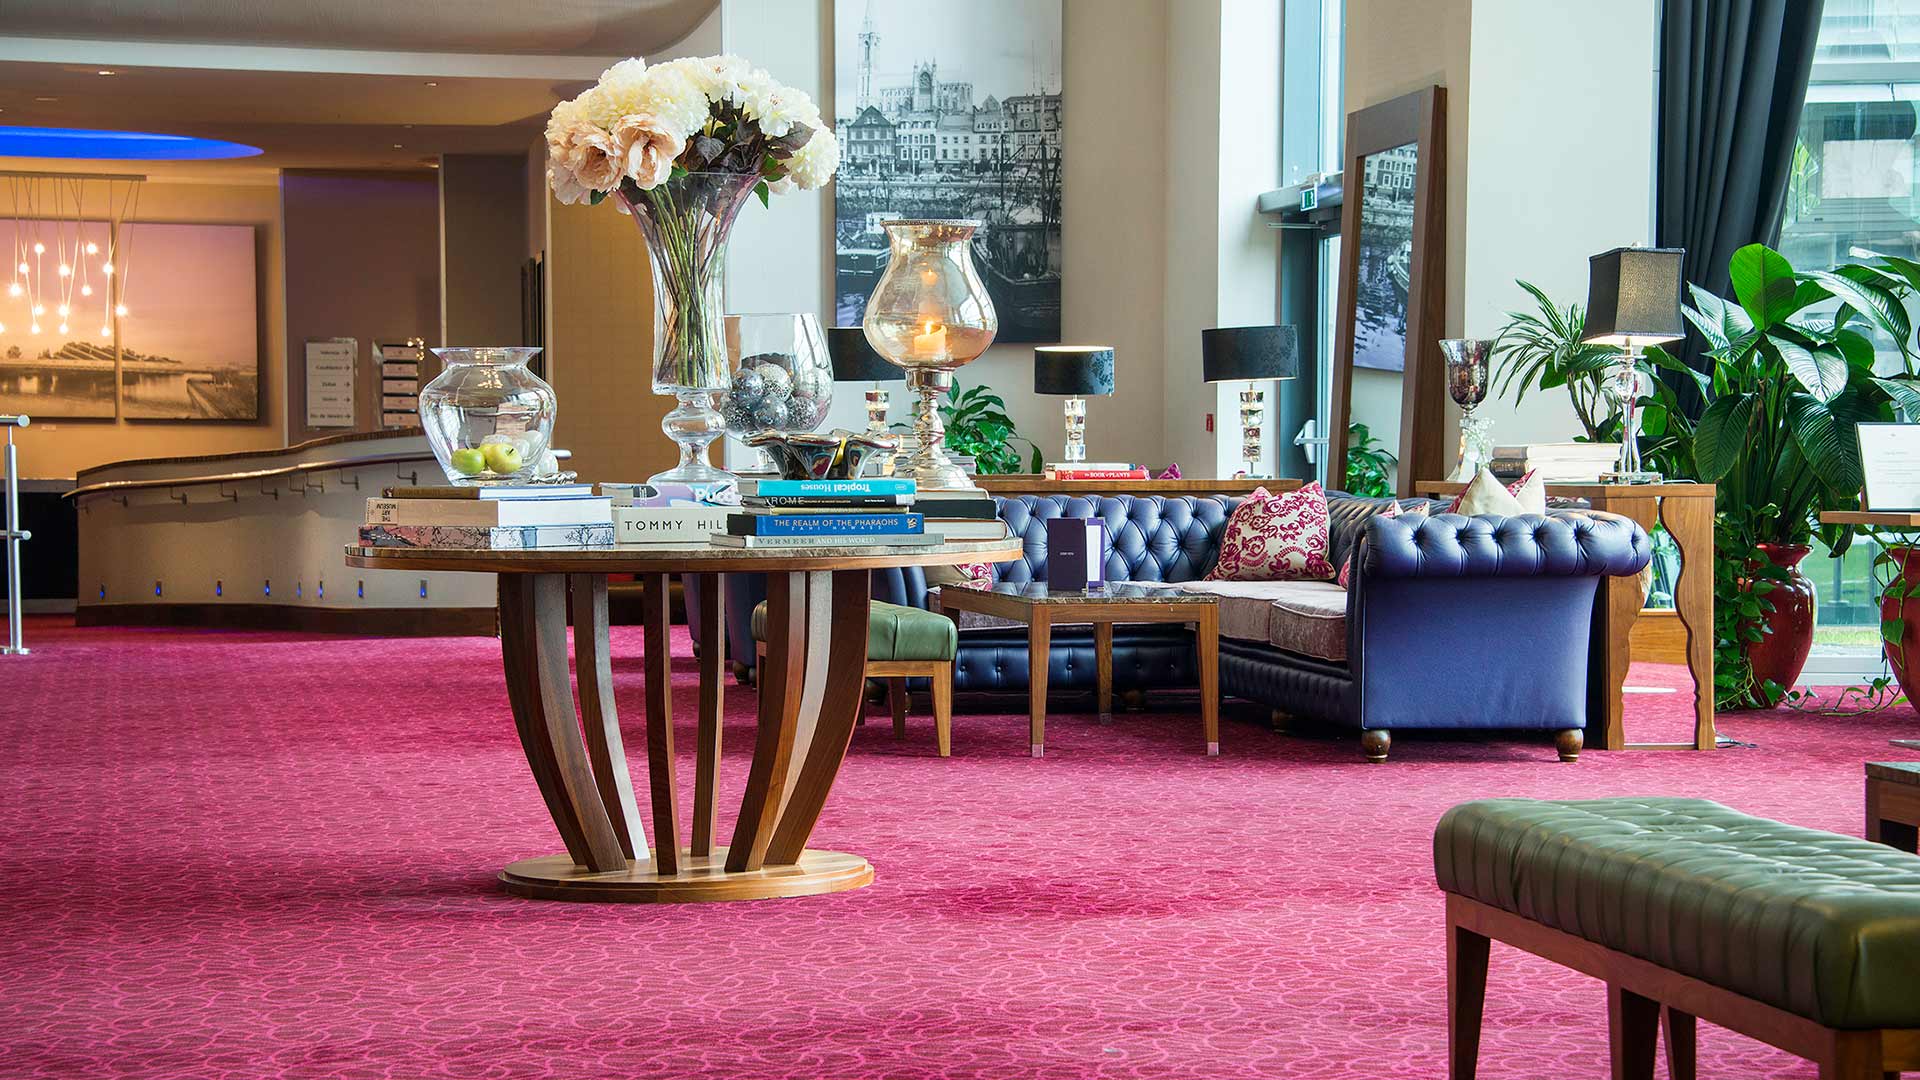 Details books, flowers and stylish seating in the Cork International Hotel lobby